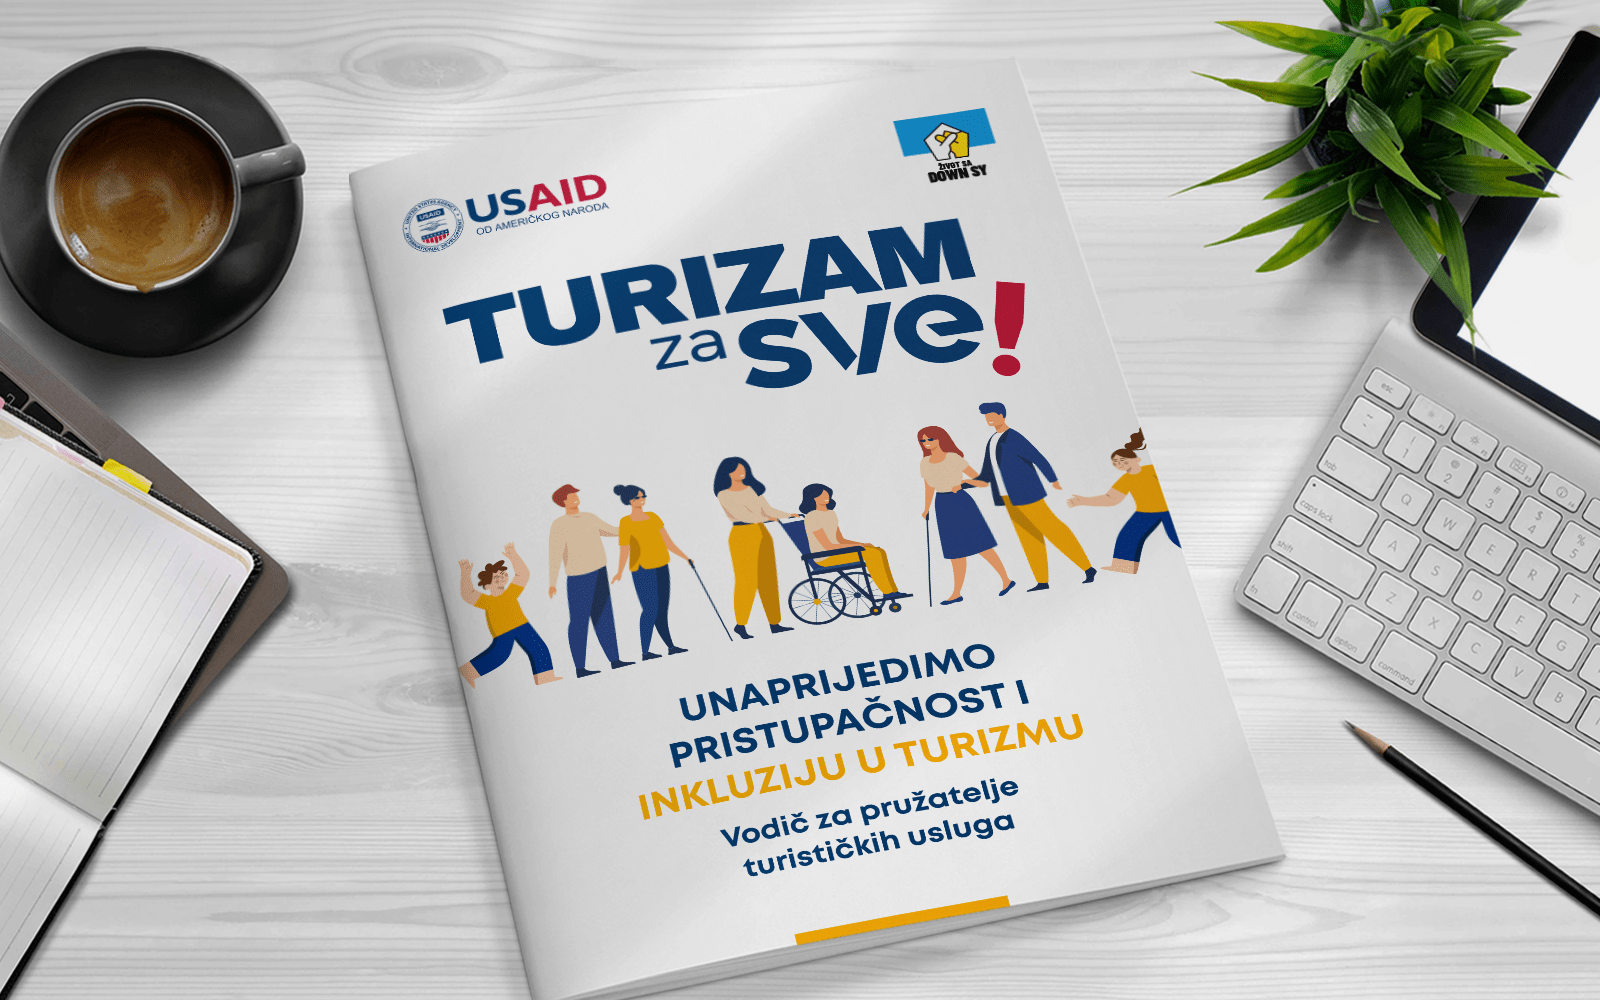 Tourism for All_guide-for-service-providers-in-tourism_rights-of-persons-with-disabilities_disability-in-tourism_how-to-get-employed-in-tourism_jobs-in-tourism-for-persons-with-disabilities_employer_inclusion_tourism_usaid-turizam